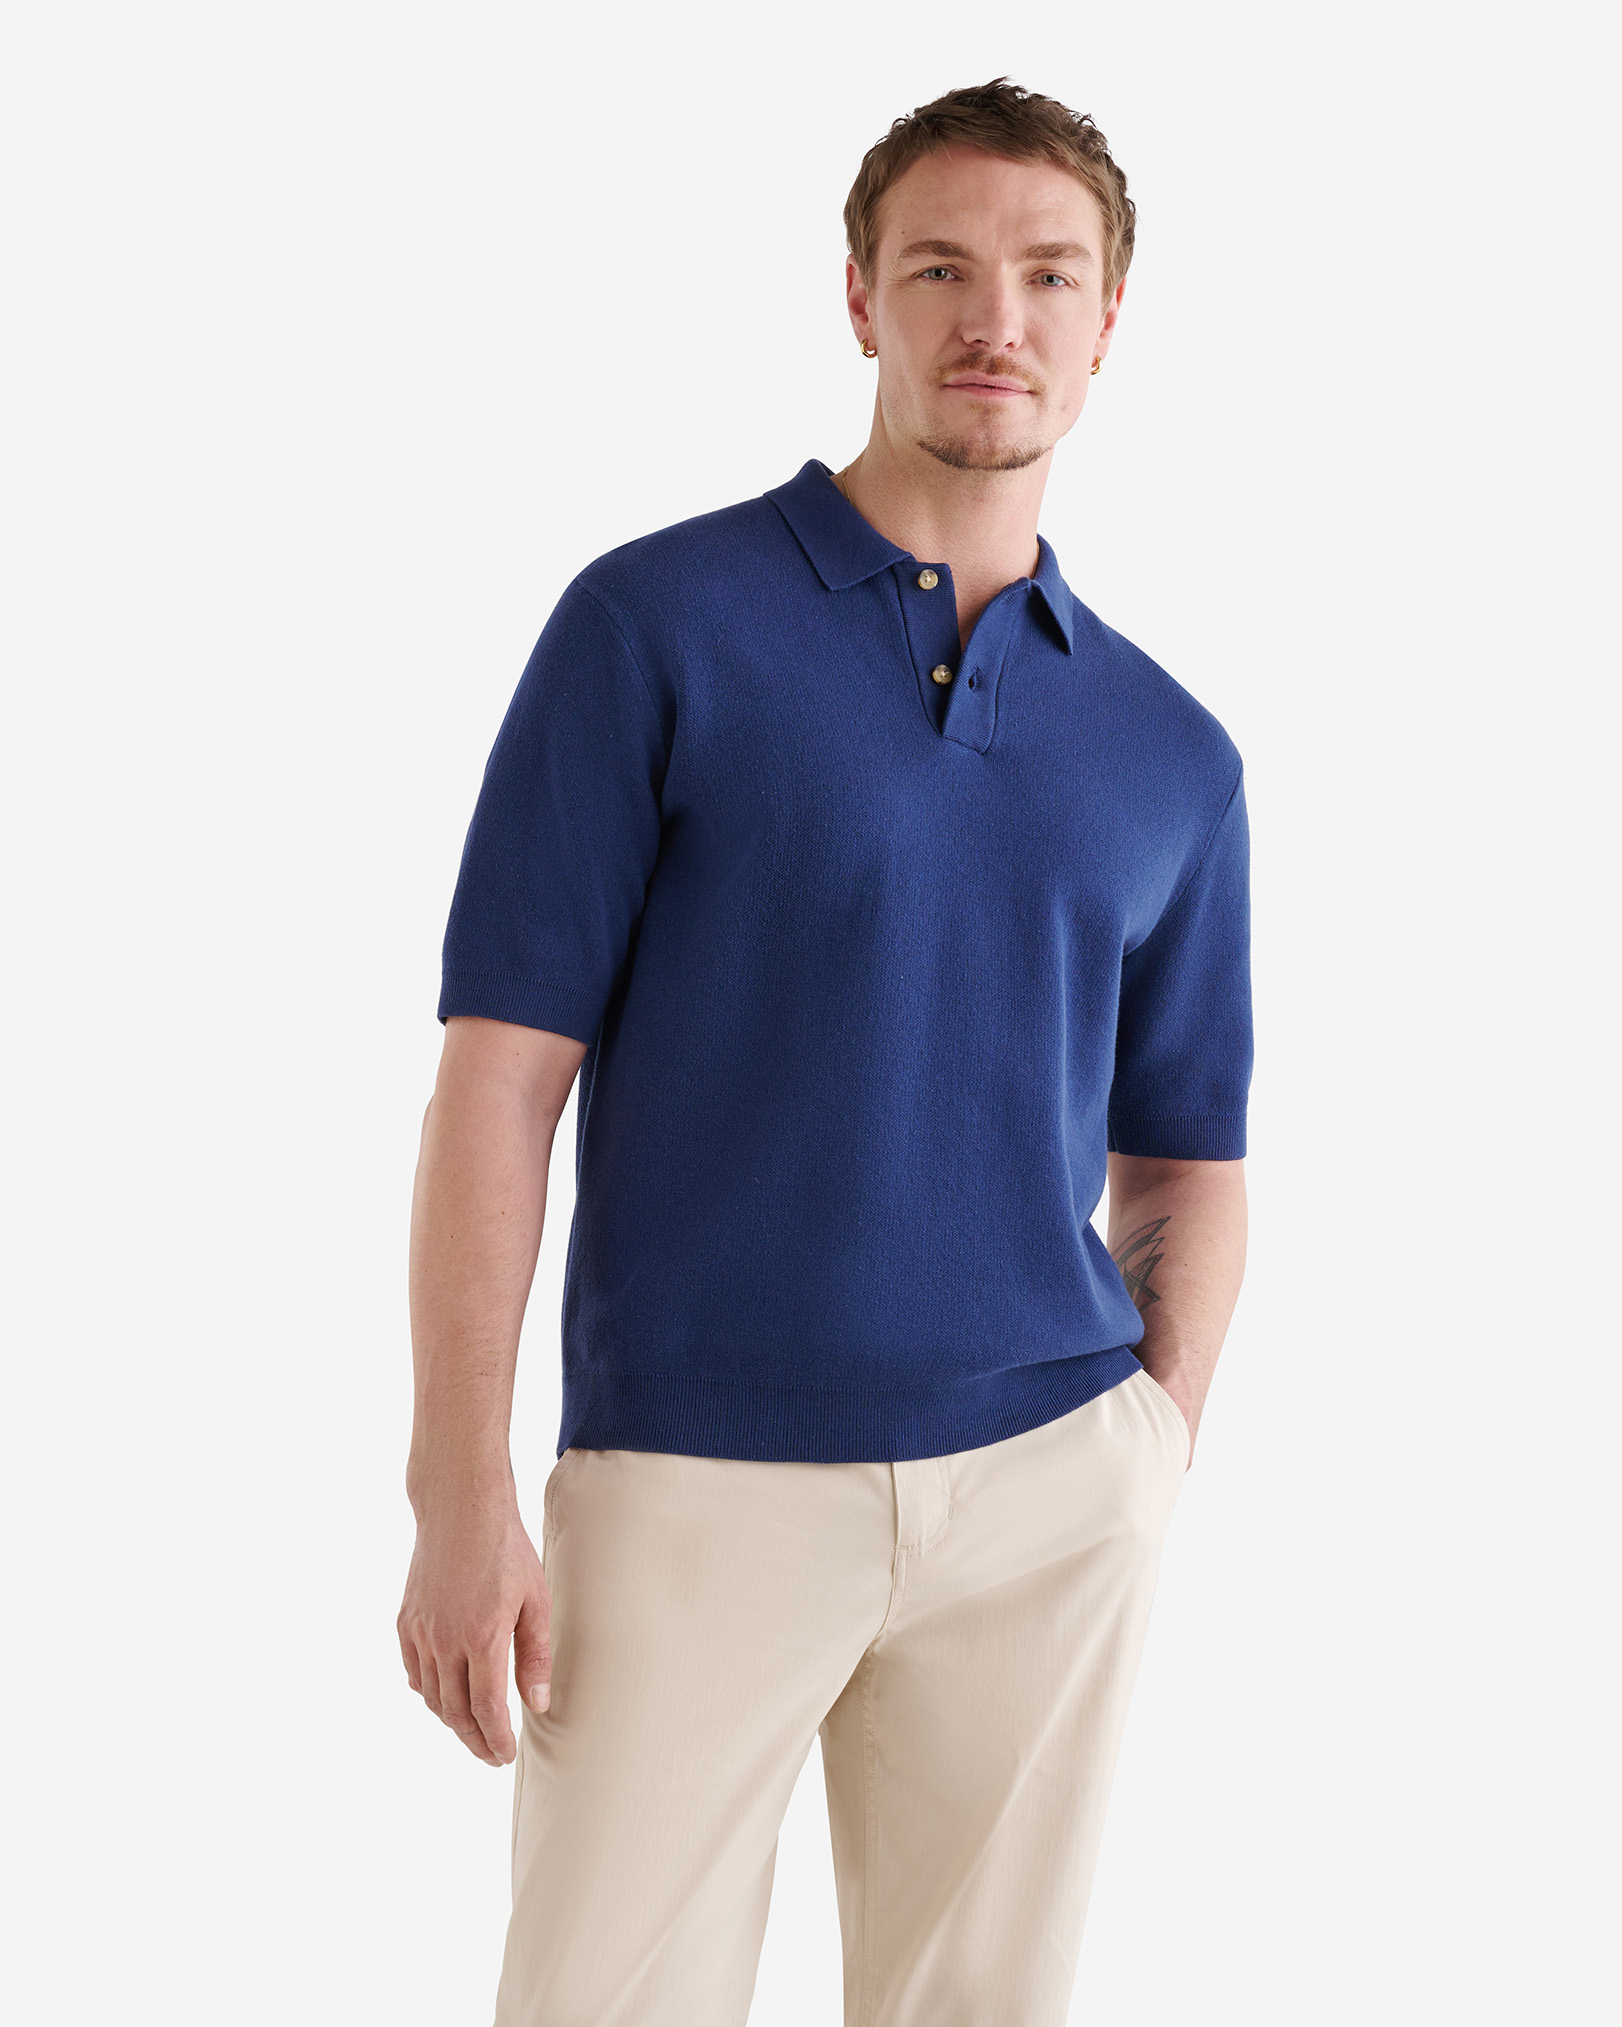 Roots Severn Sweater Polo Shirt in Naval Blue